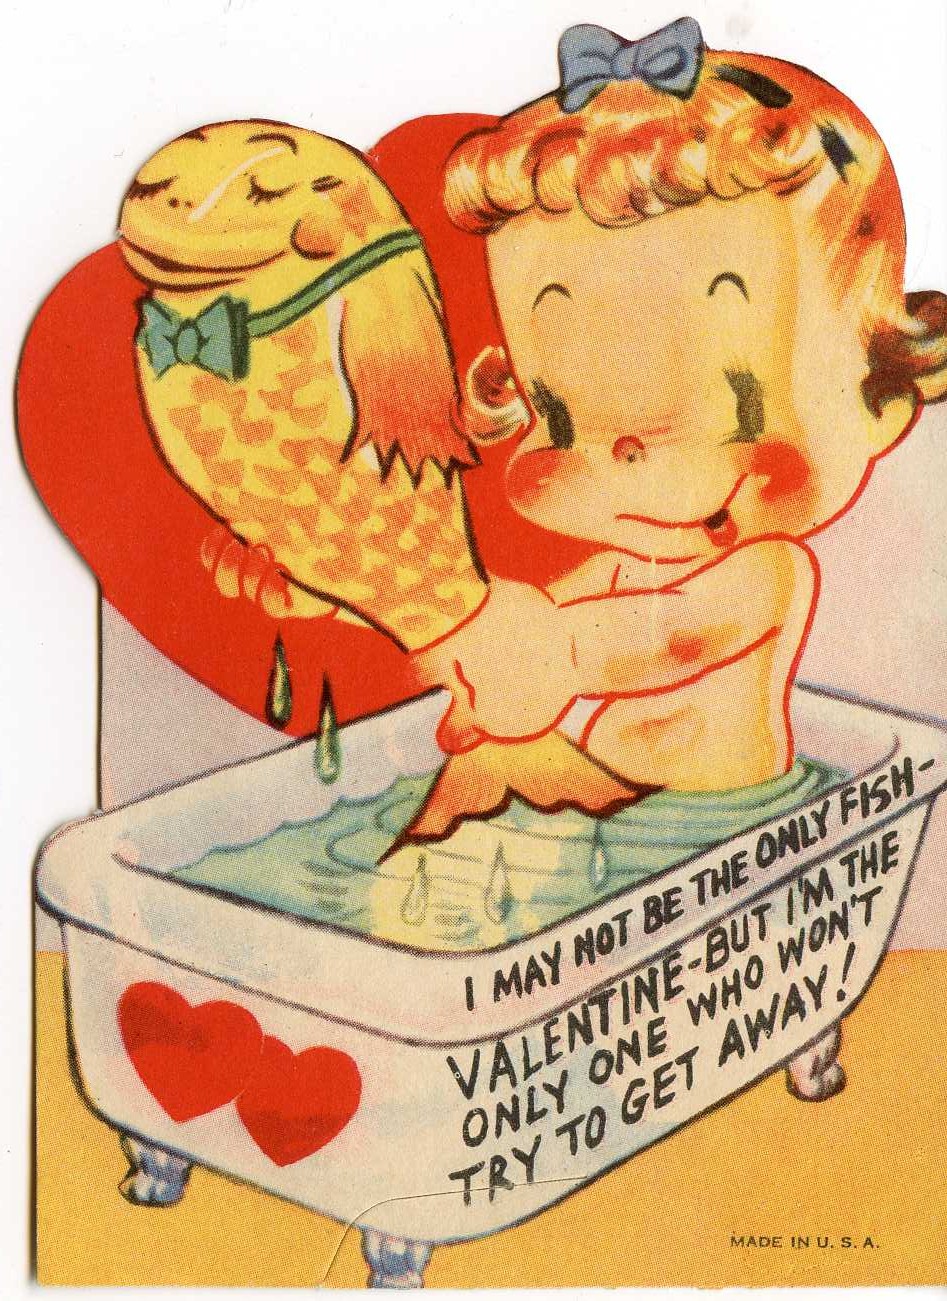 http://www.nopatternrequired.com/2010/02/vintage-crafty-saturdays-free-vintage-valentines-to-print-and-give/